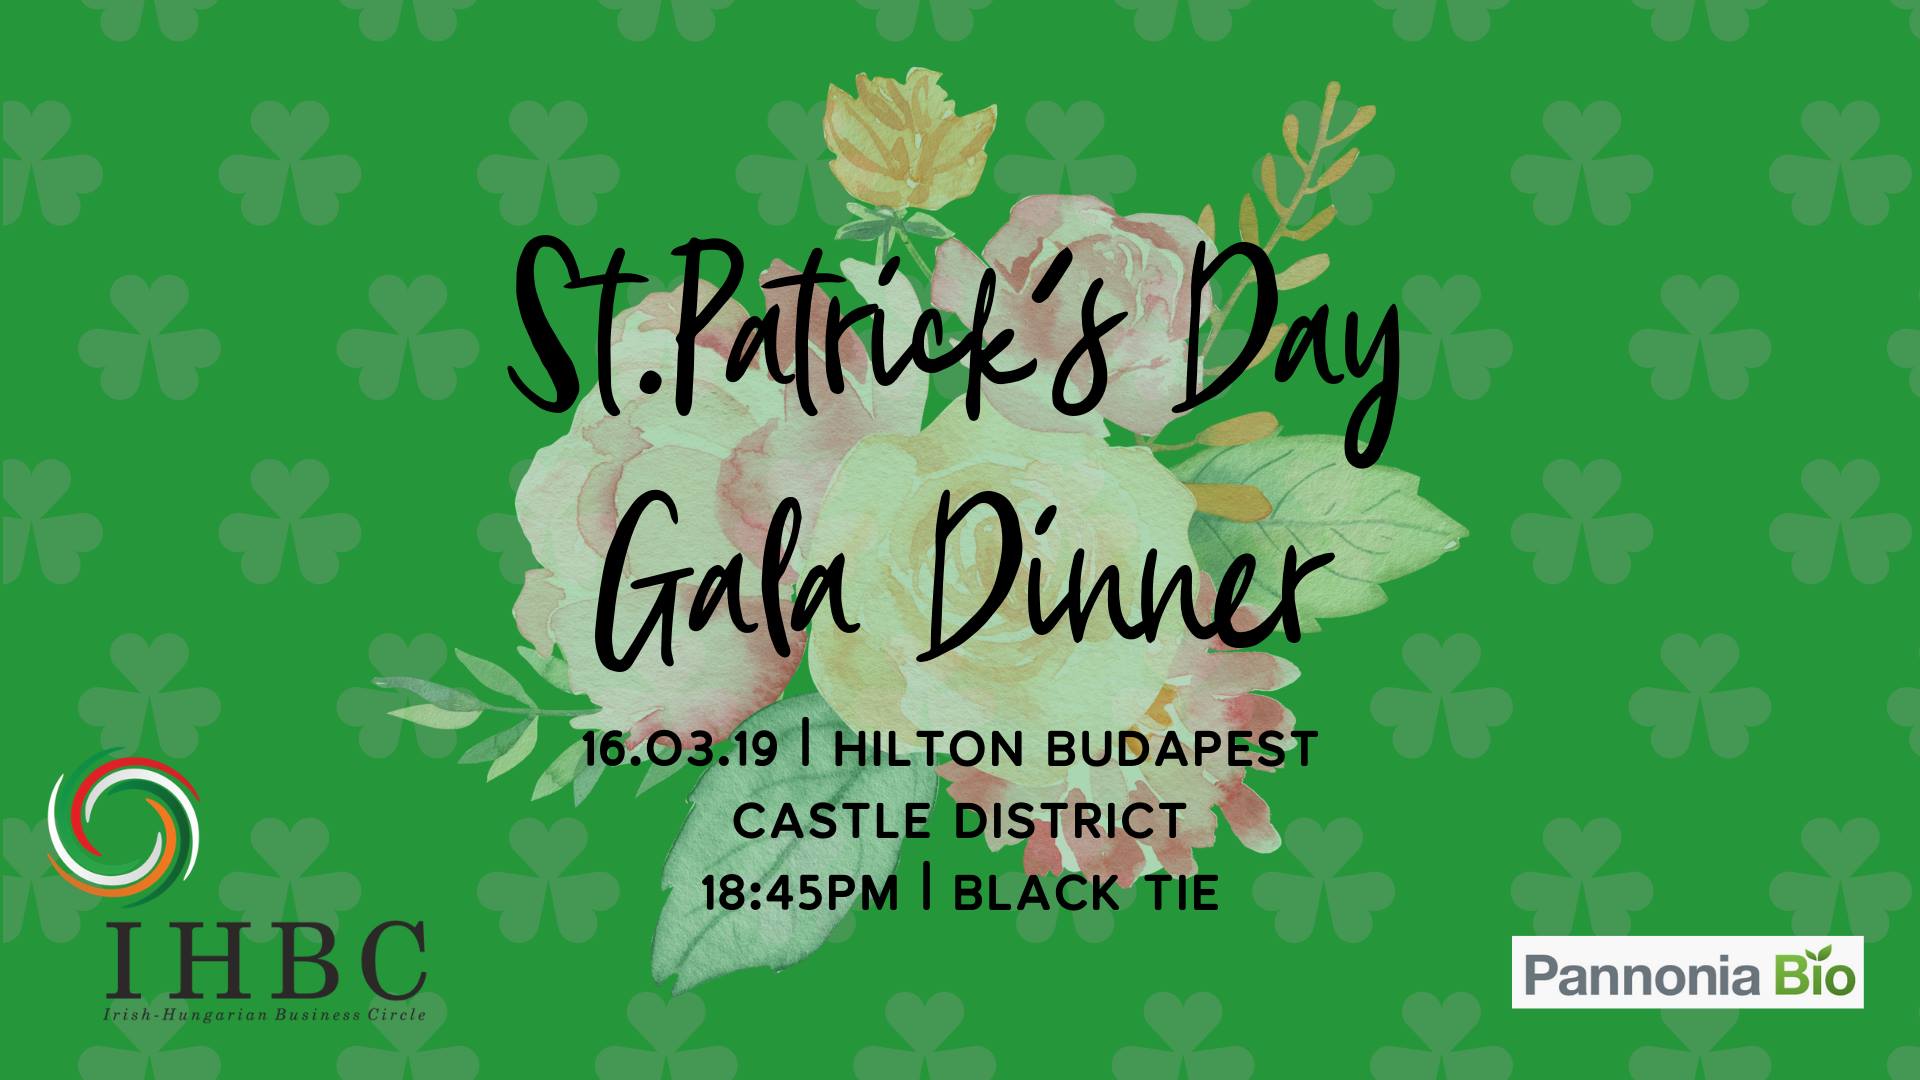 St Patrick’s Day Gala Dinner In Budapest, 16 March